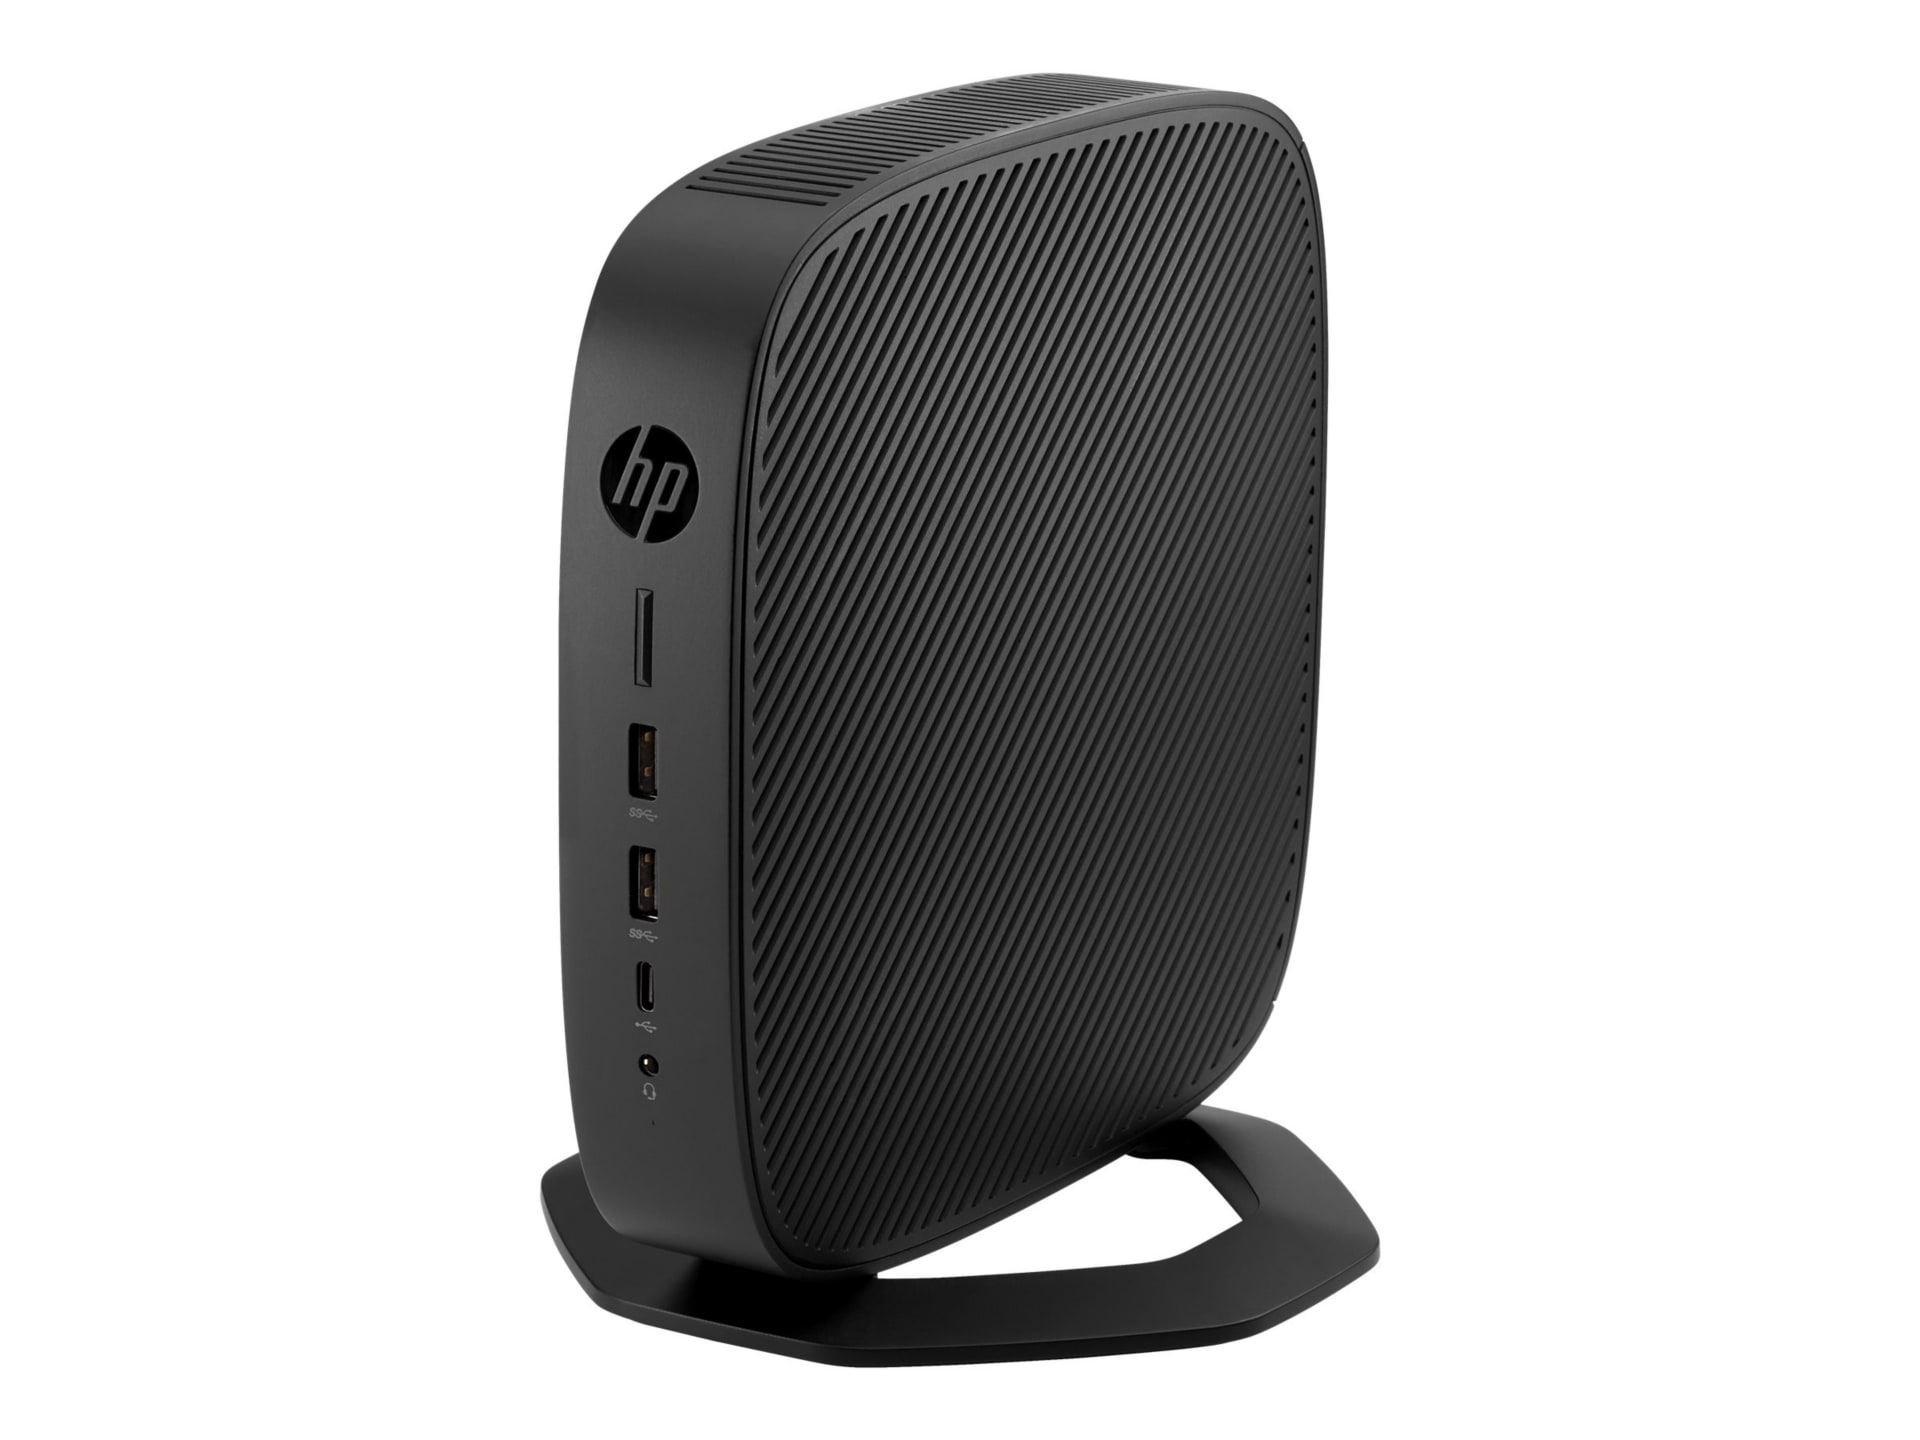 HP t640 Small Form Factor Thin Client - AMD Ryzen R1505G Dual-core (2 Core)